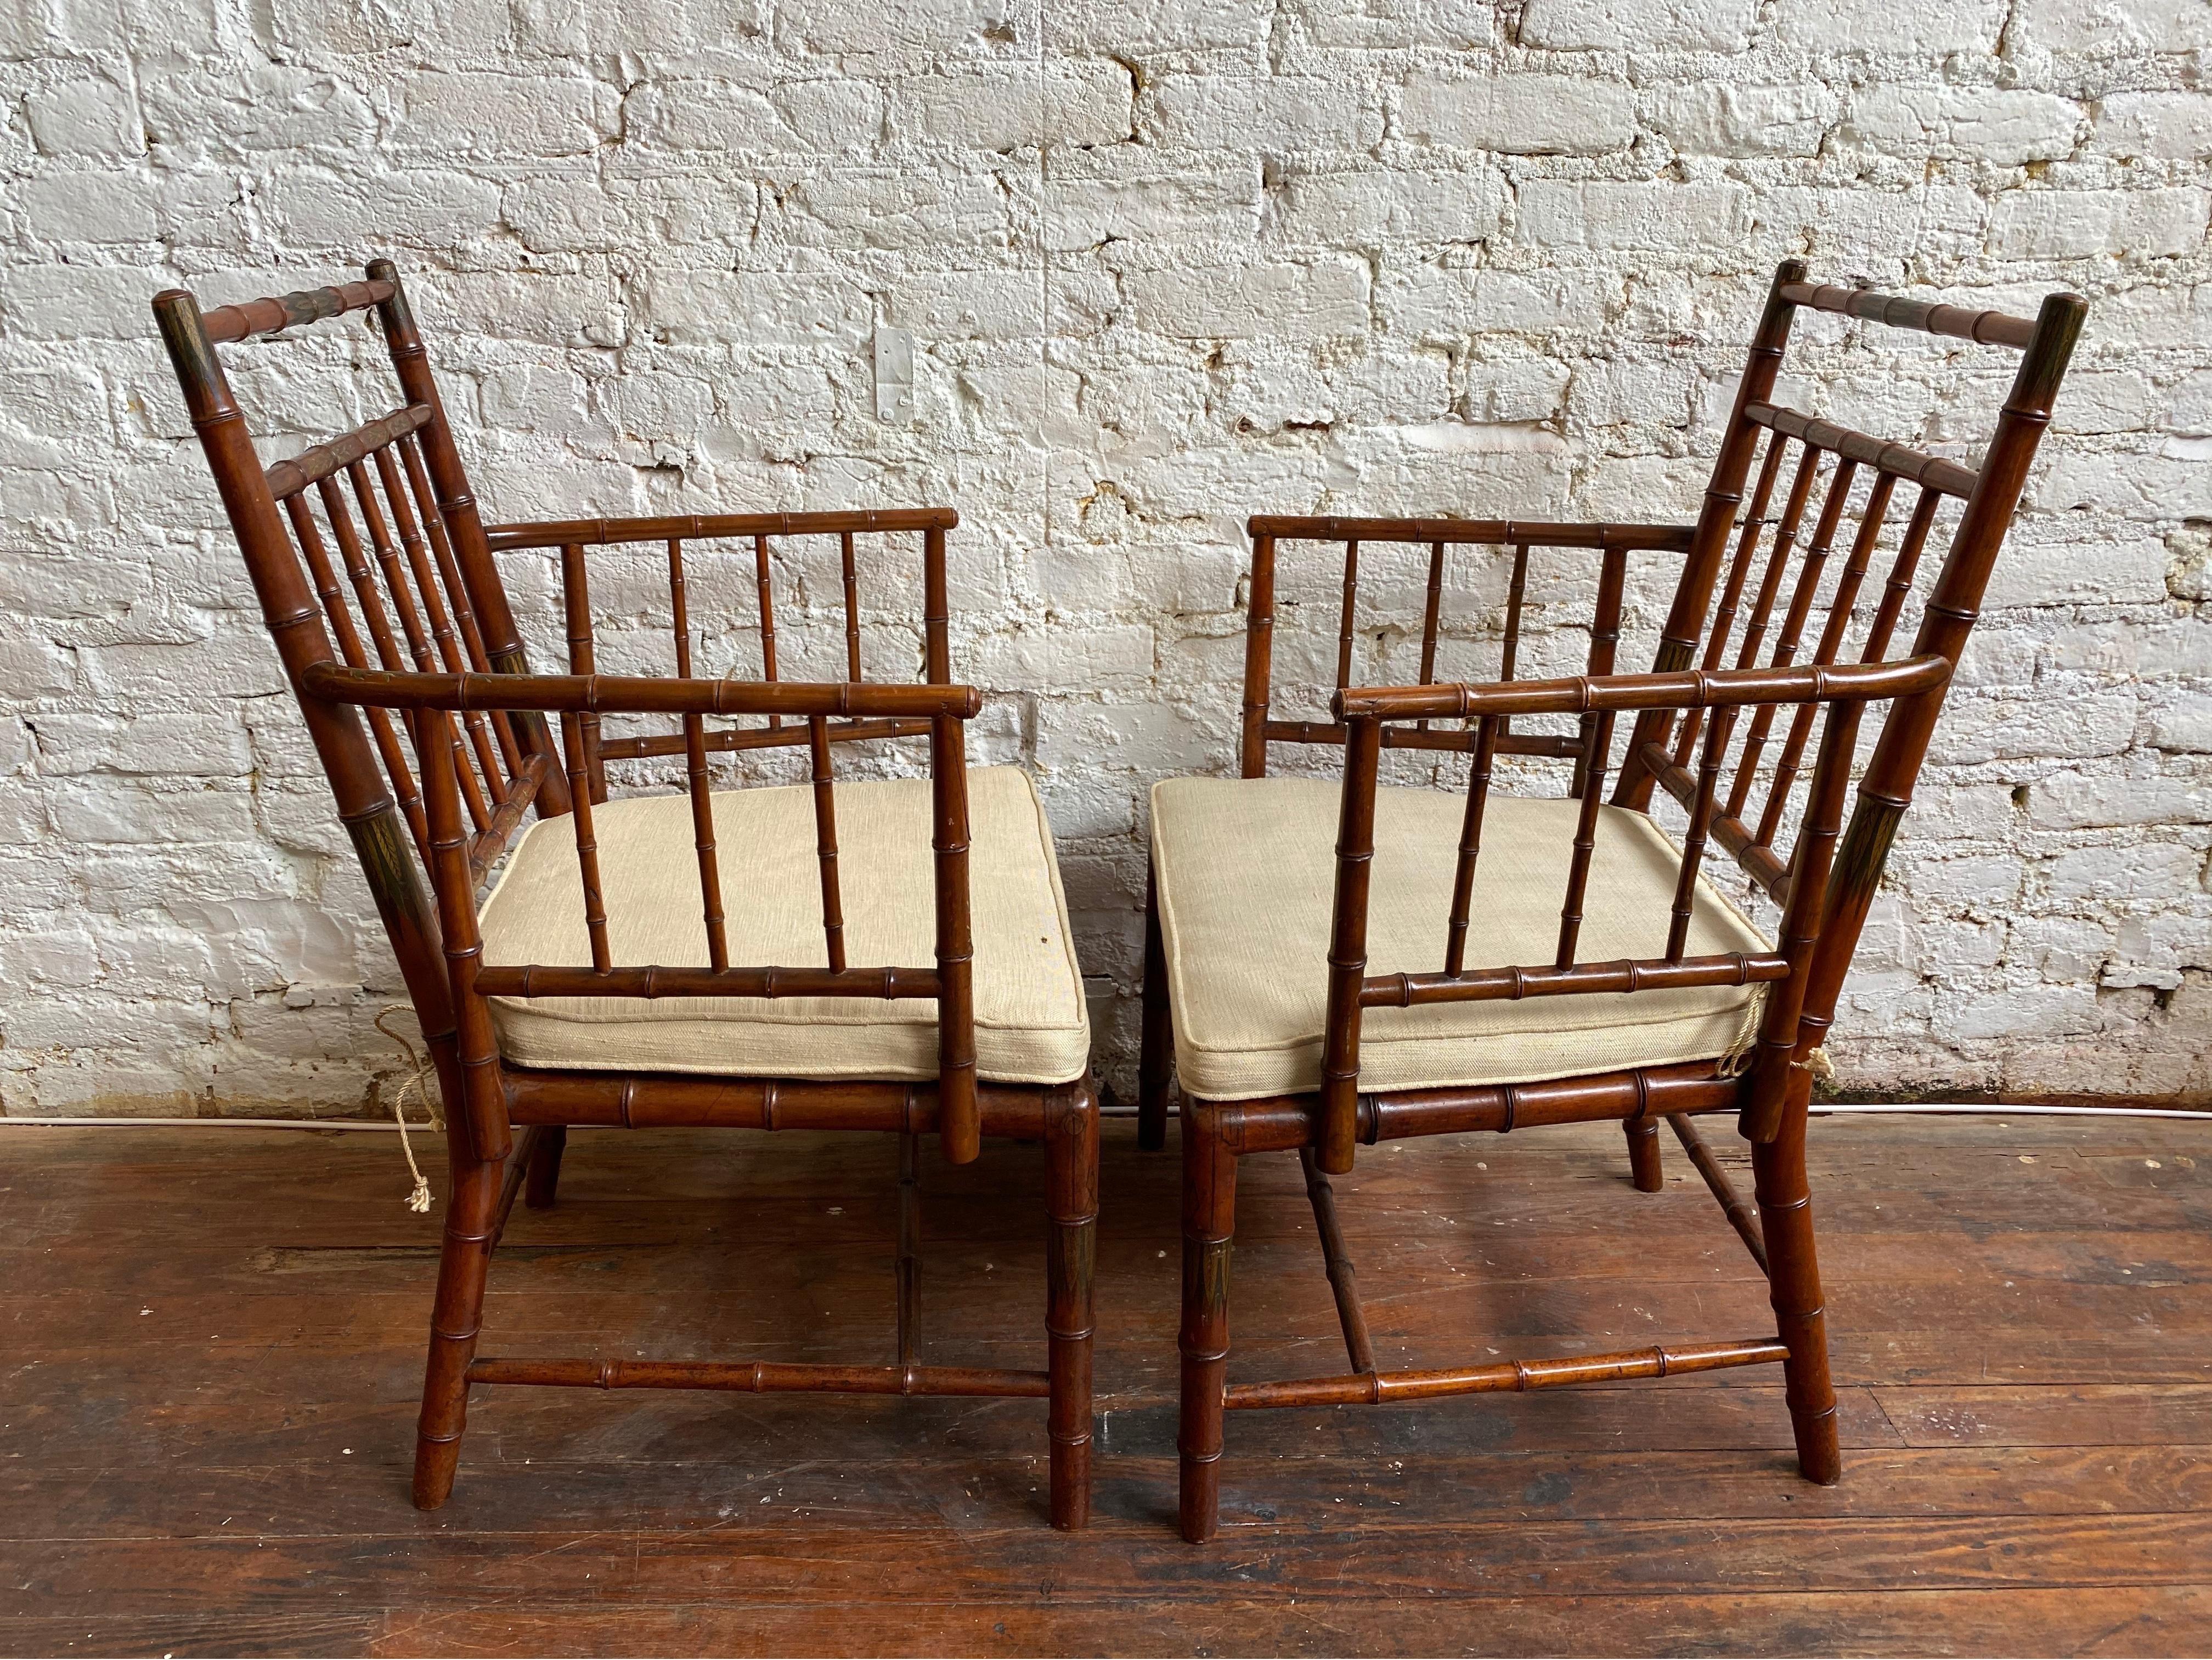 Incredible Pair of Faux Bamboo Chairs with Polychrome Paint Decoration 1